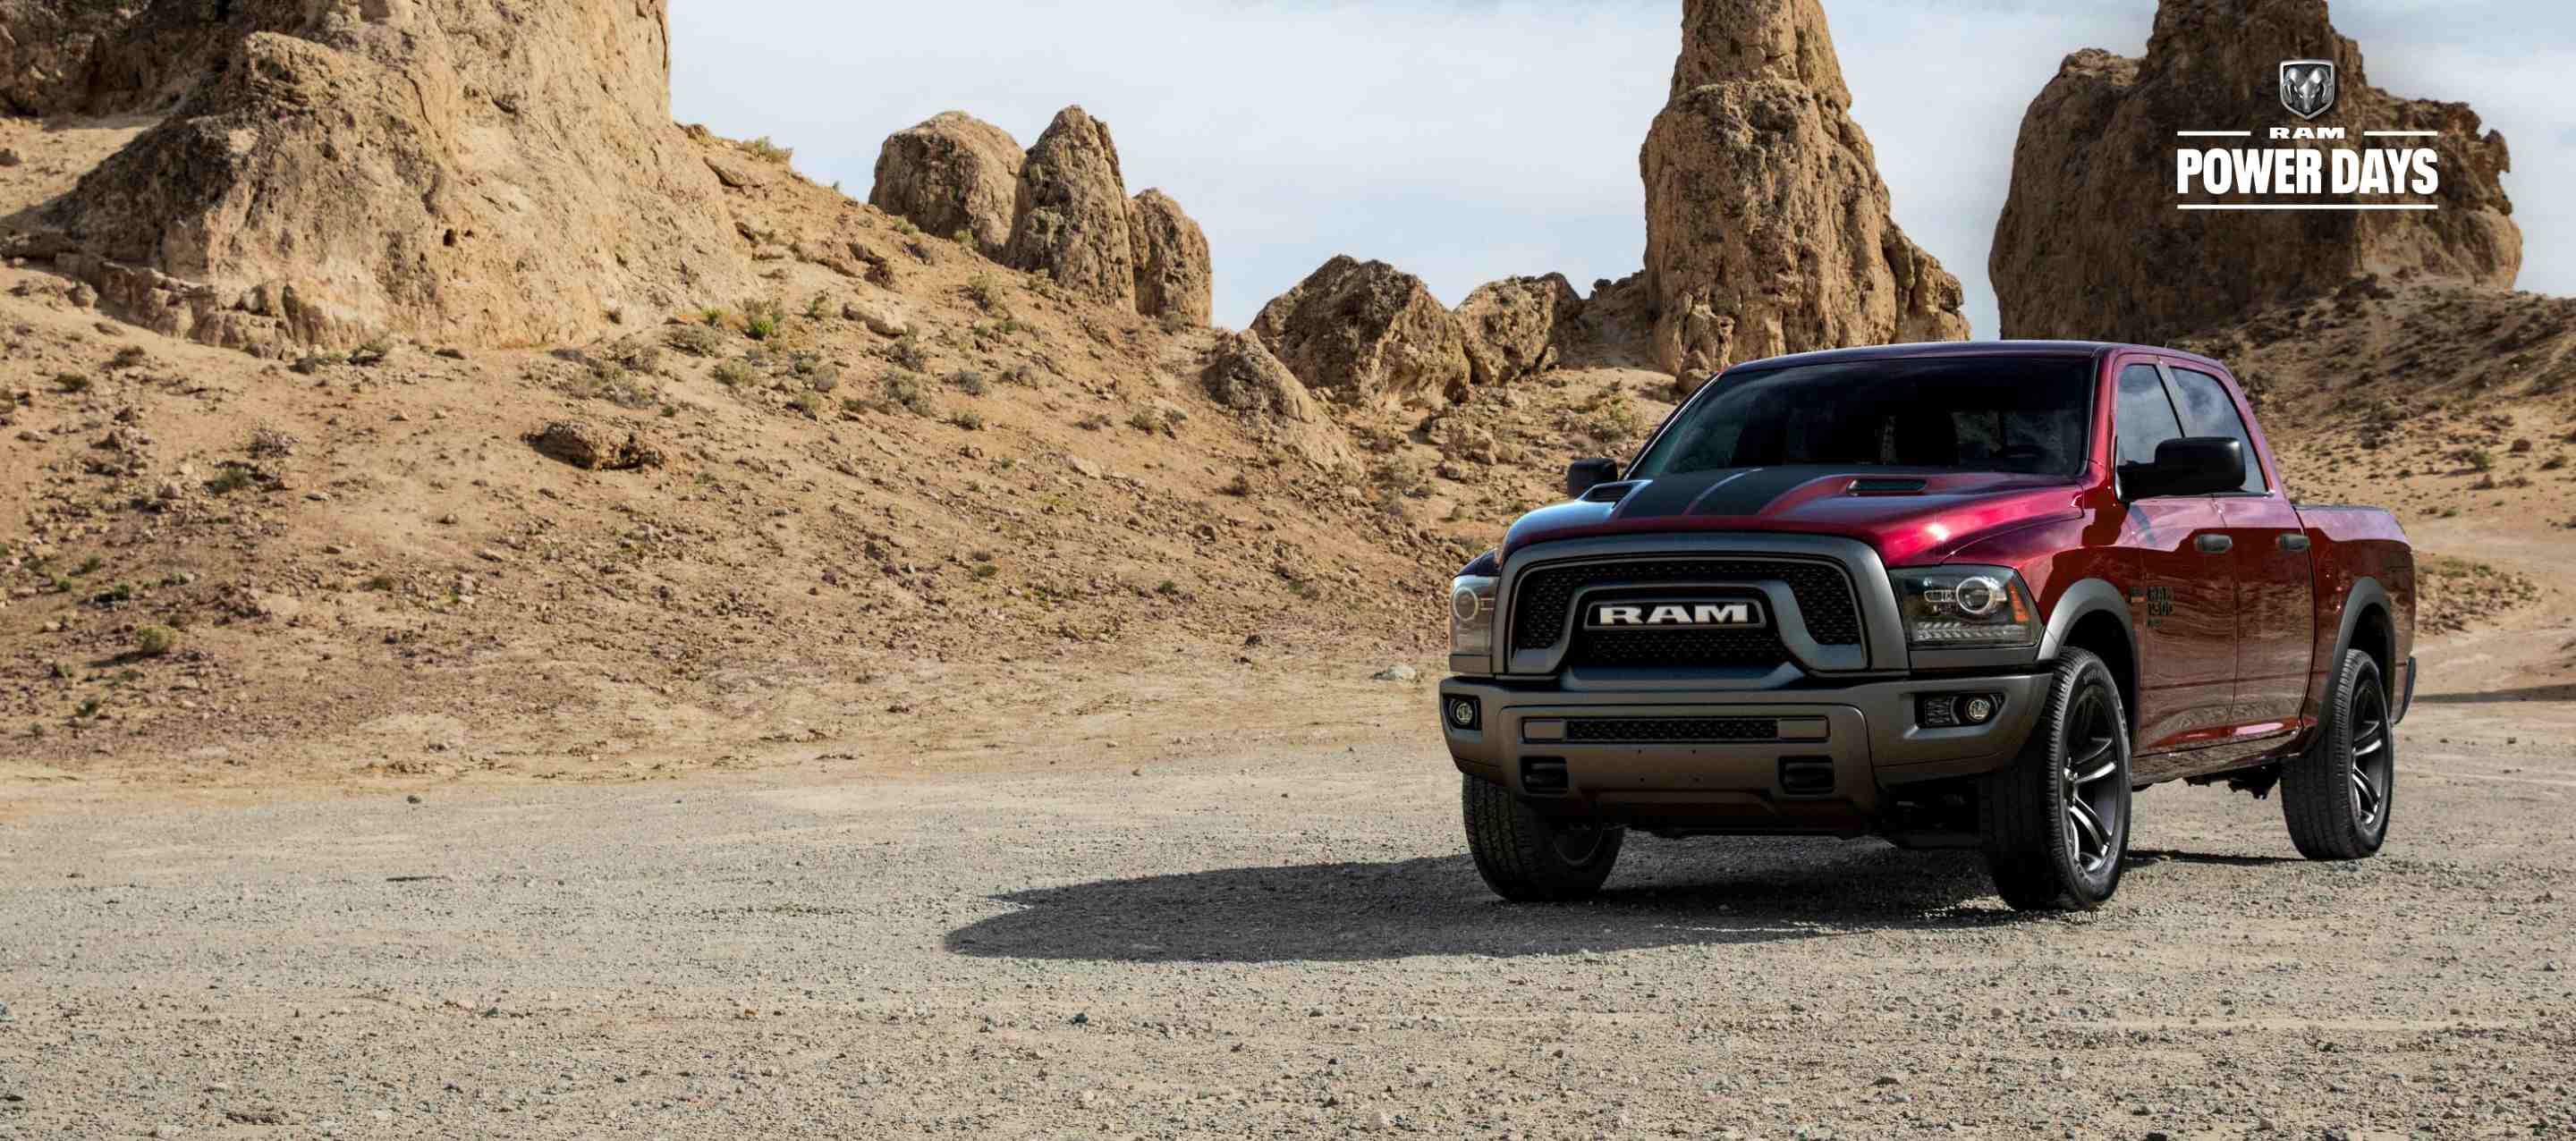 The 2023 Ram 1500 Classic parked on a twisting desert road with rocky outcroppings in the distance. Power Days Sales Event.